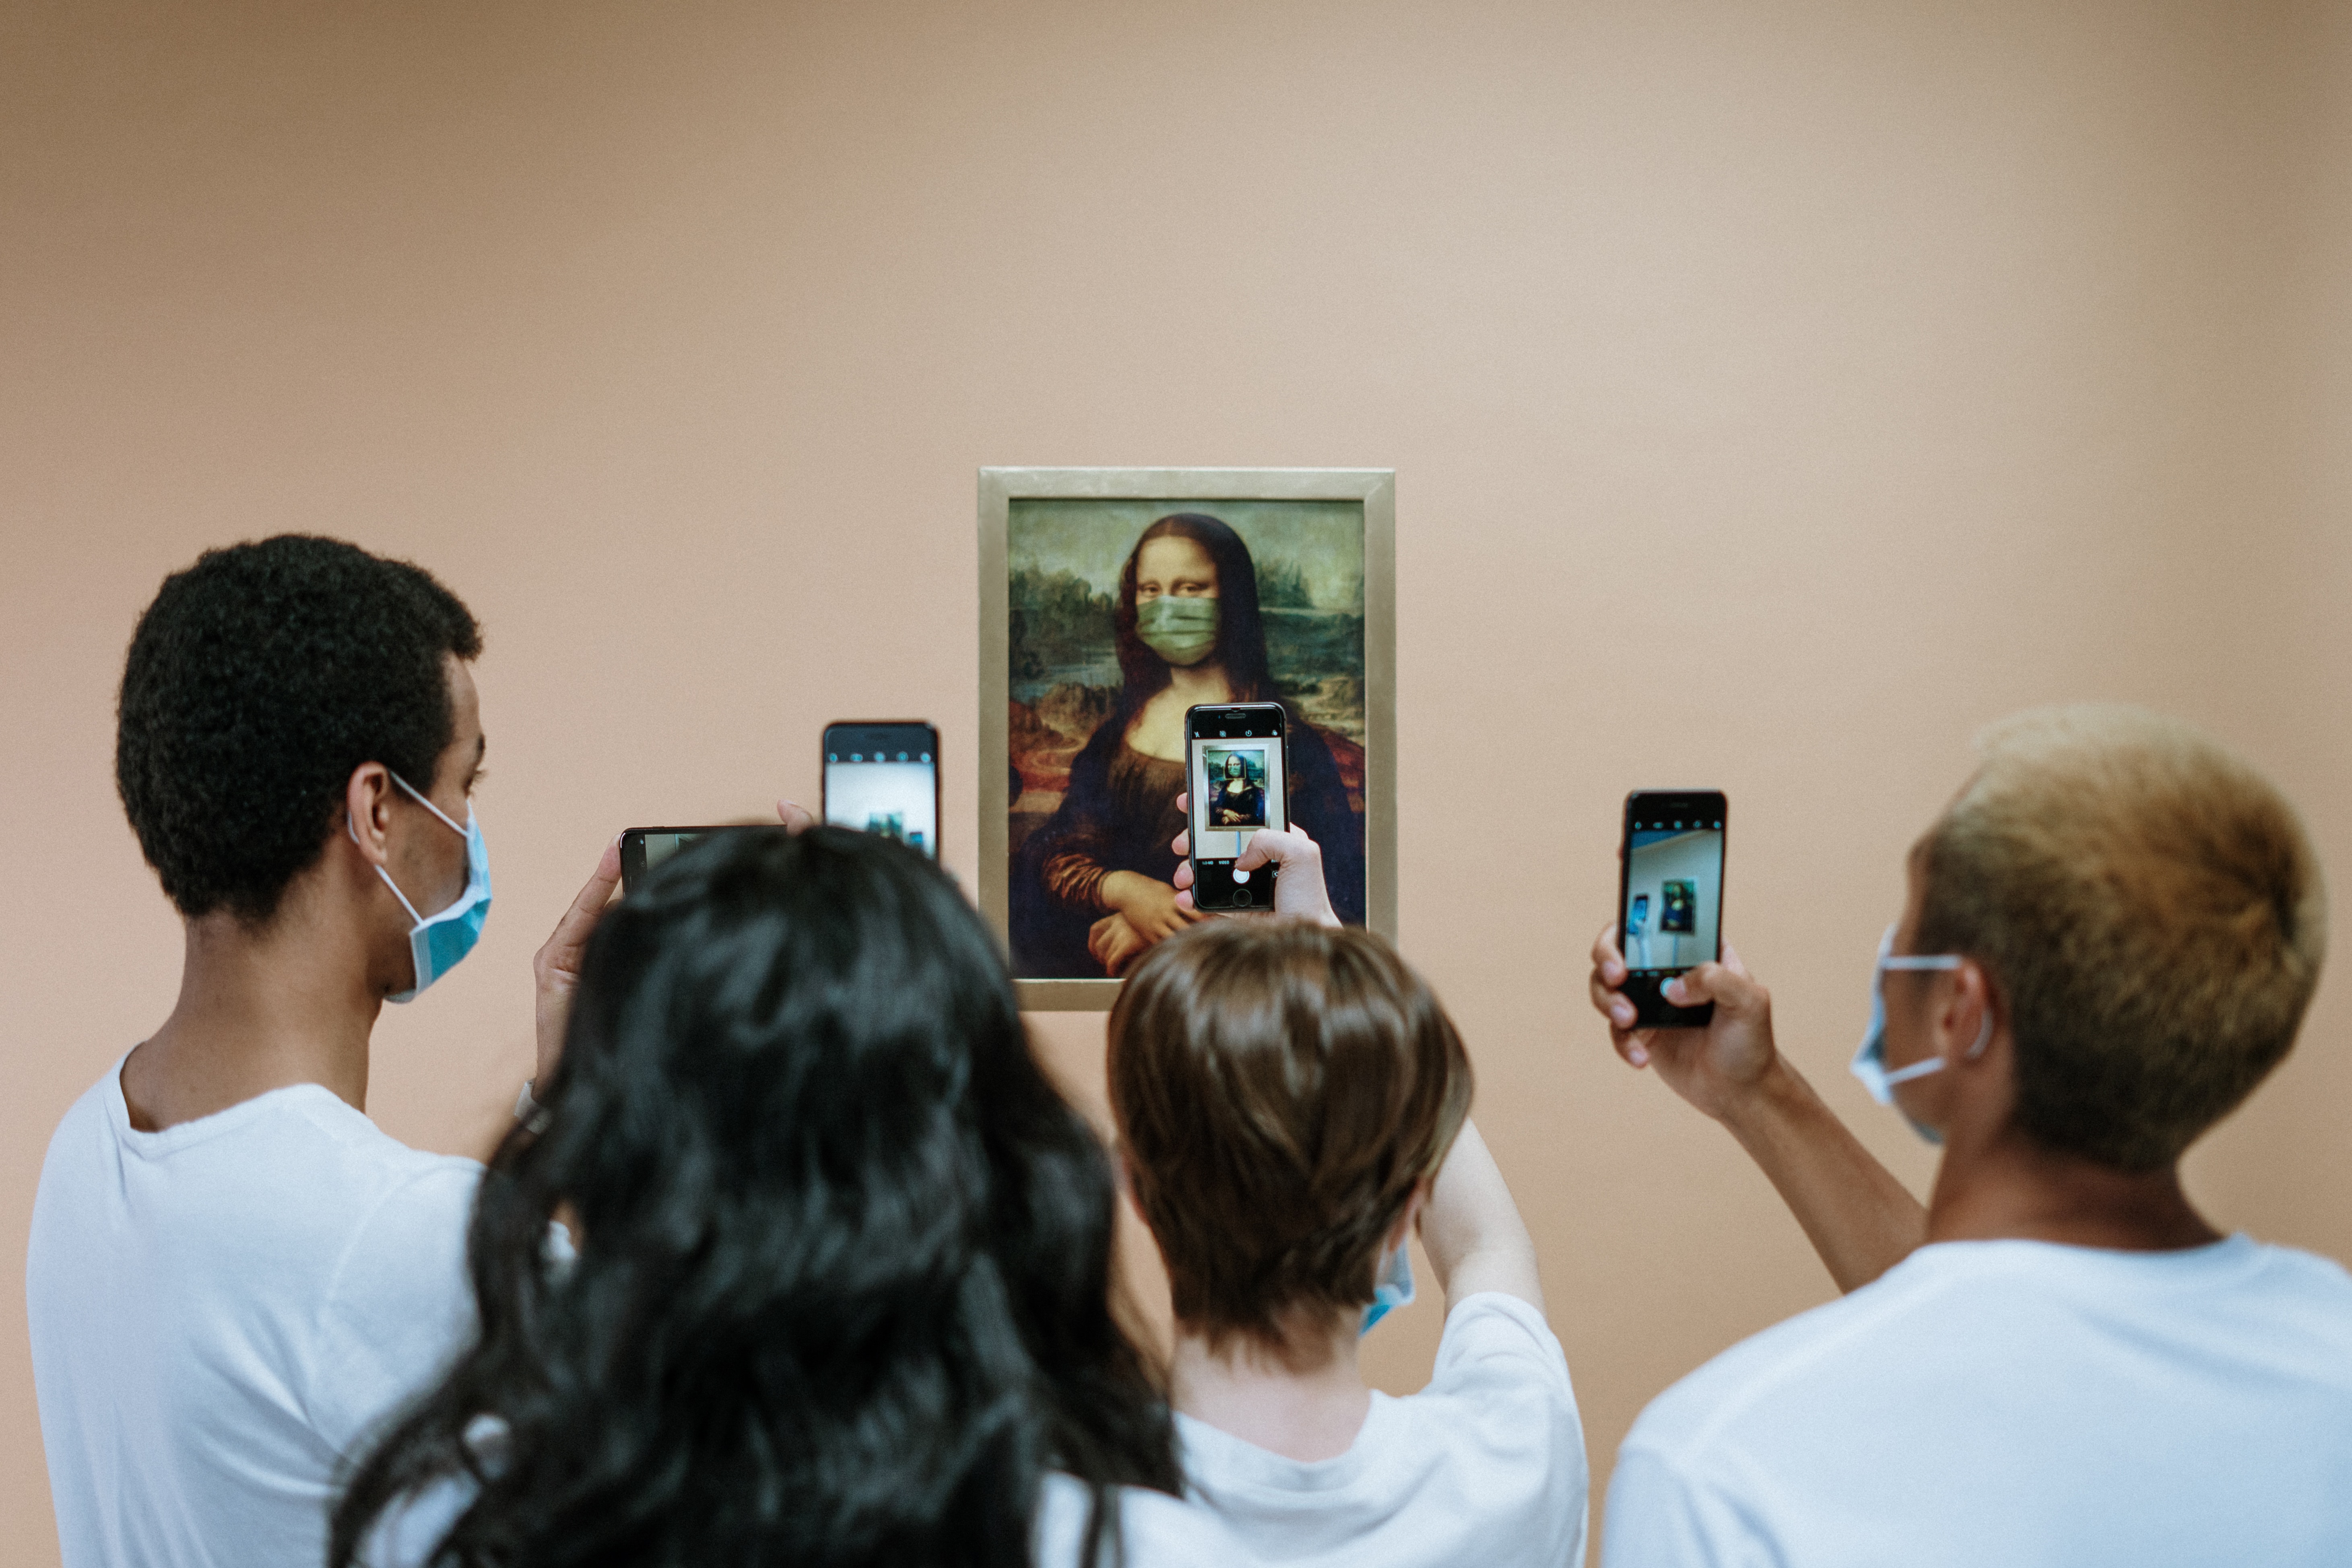 people-taking-picture-of-a-painting-of-mona-lisa-with-face-3957980.jpg